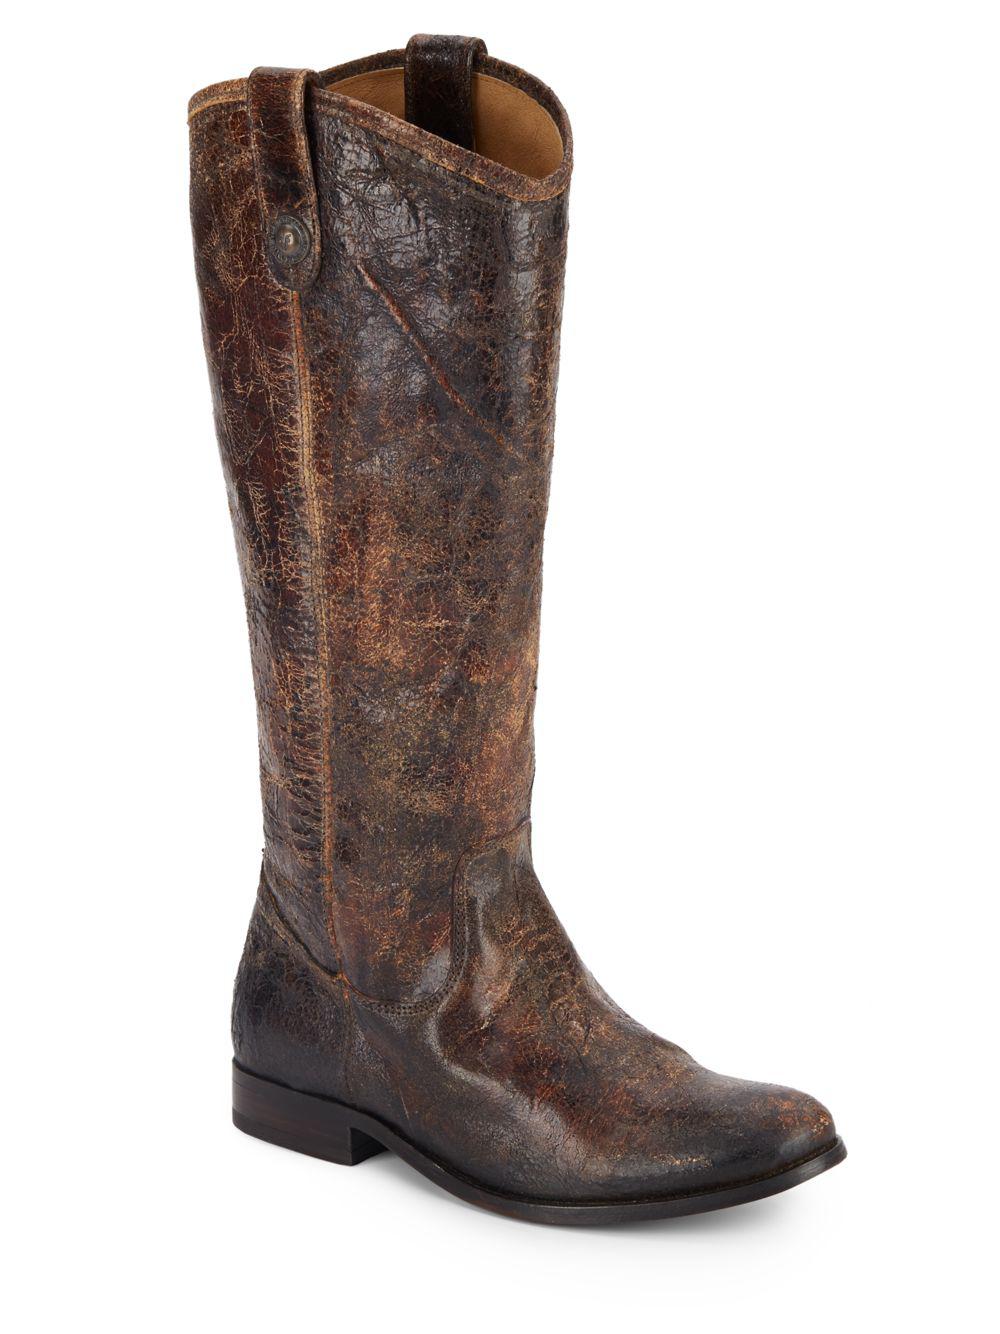 Frye Melissa Distressed Leather Tall Boots in Brown | Lyst